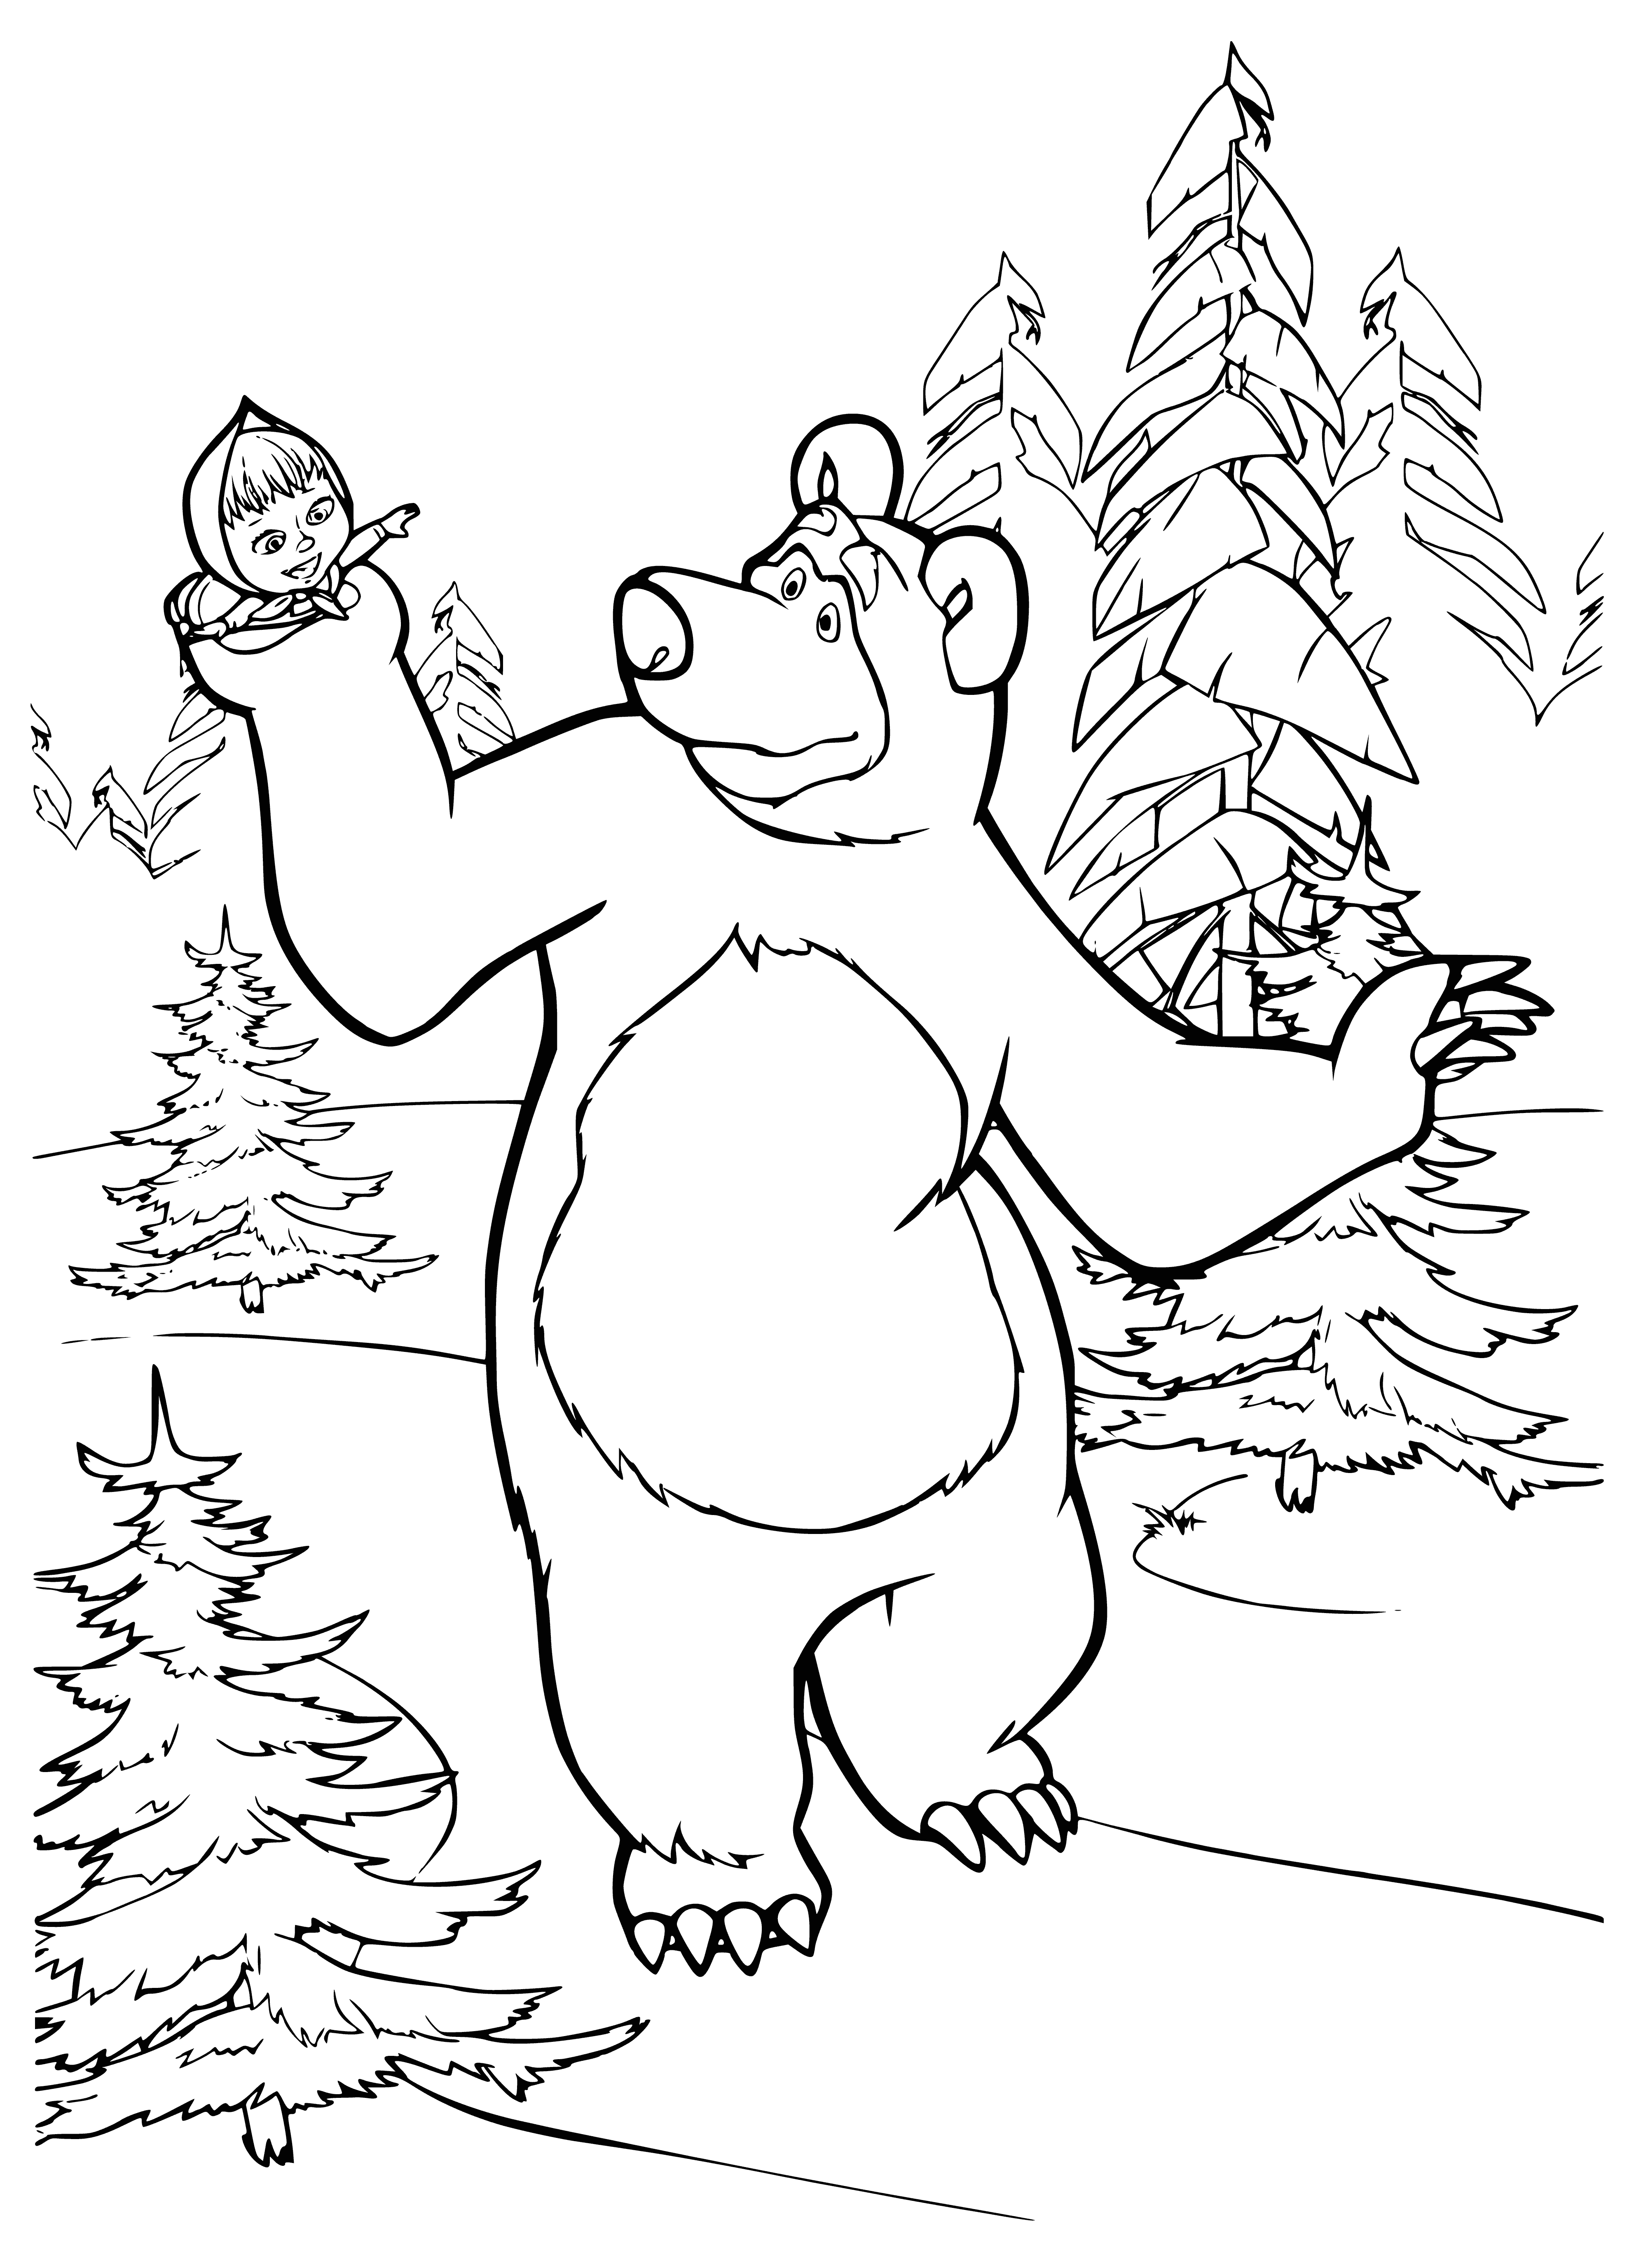 coloring page: Girl with brown hair, yellow dress and red scarf holding a teddy bear with a red scarf around its neck in front of a white house with a red roof, trees/bushes/flowers in the yard.